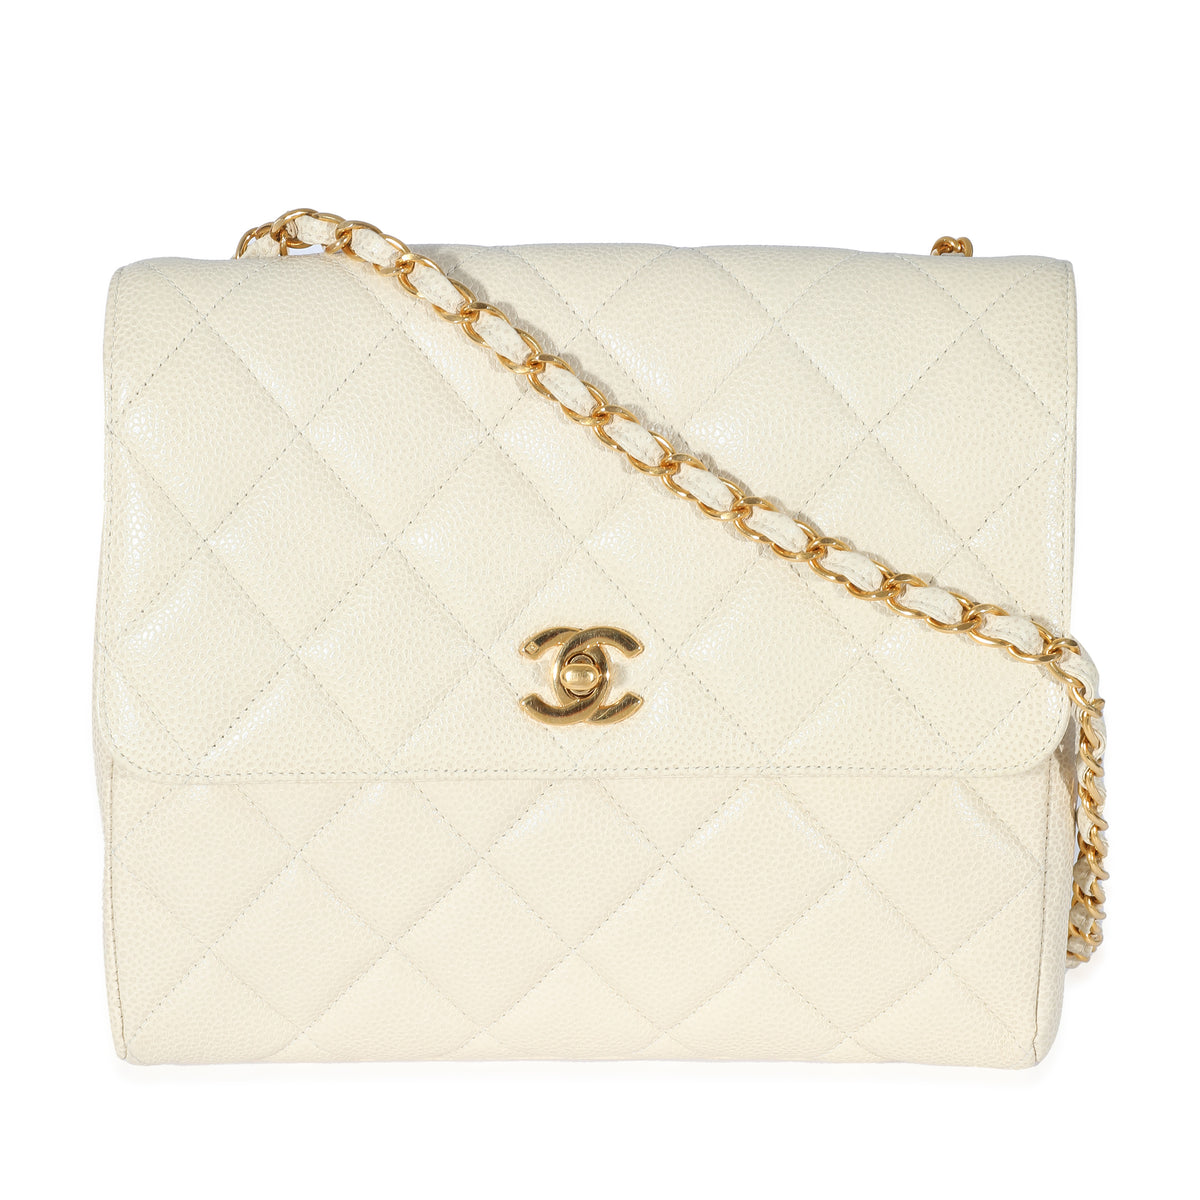 Chanel Beige Quilted Caviar Chain Flap Bag, myGemma, JP